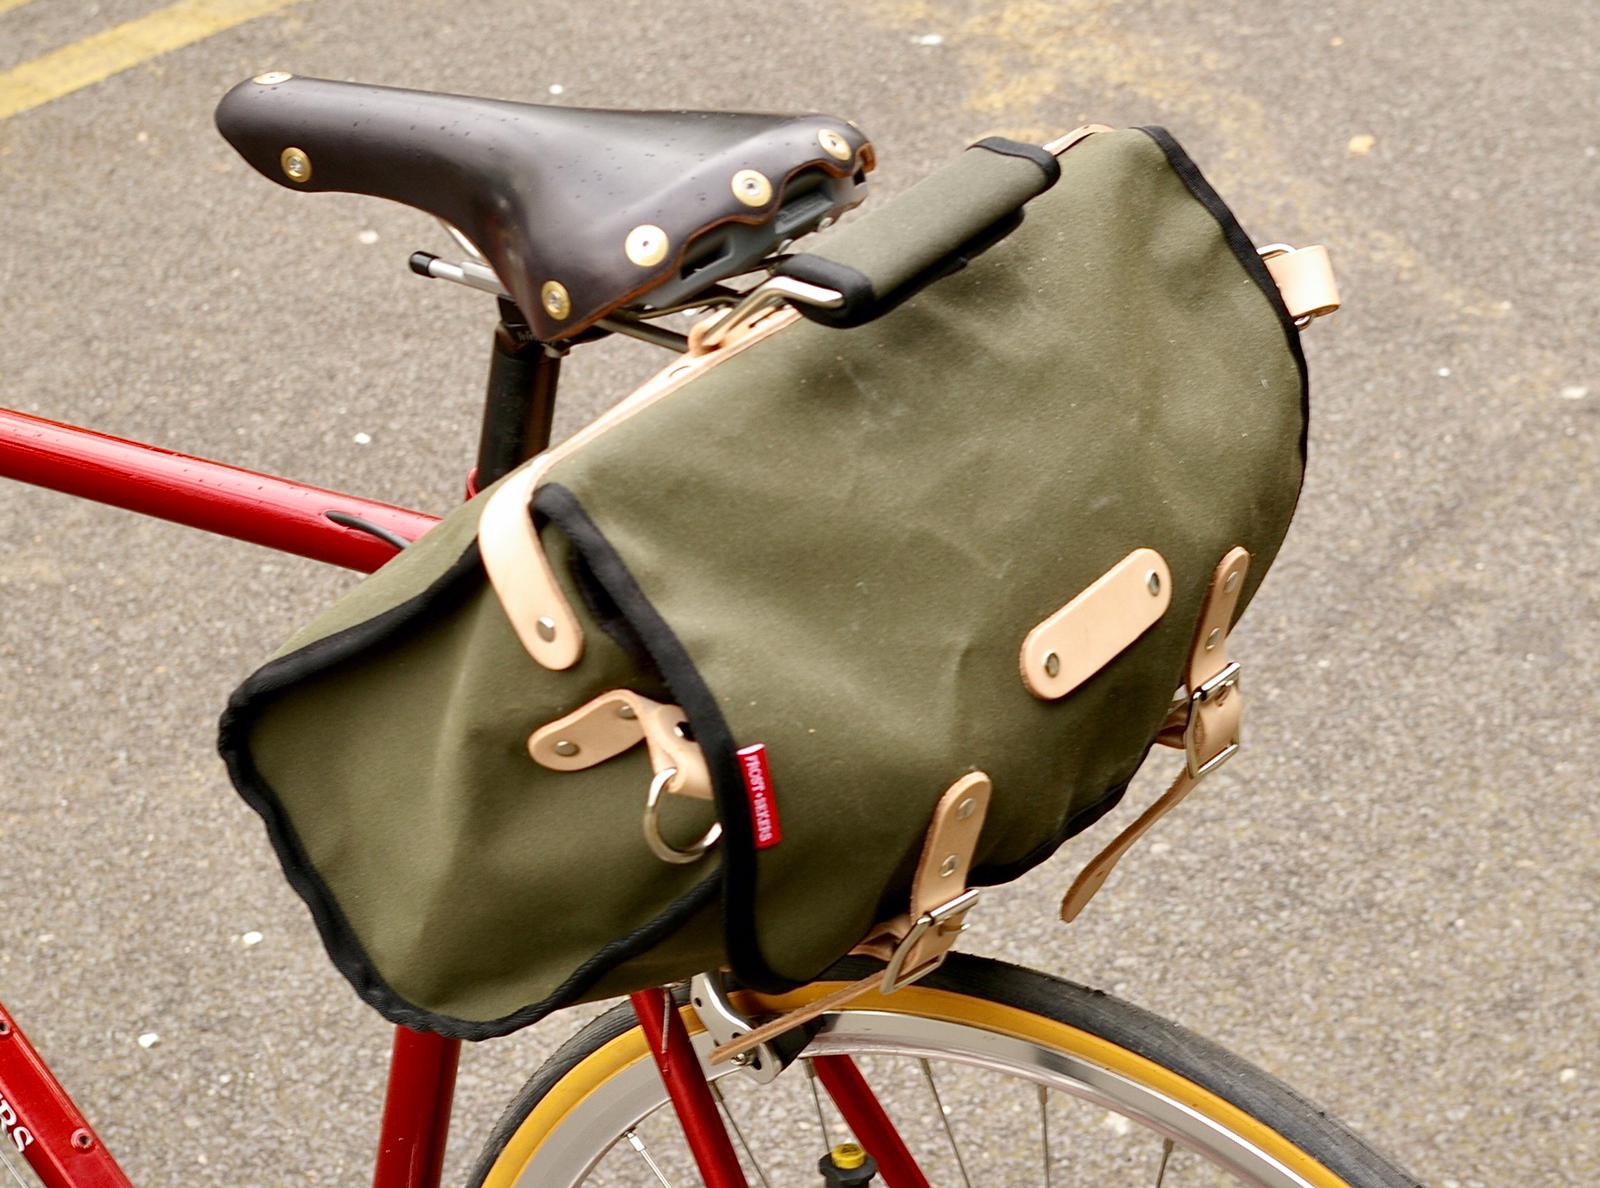 Frost and Sekers Otis saddle bag mounted to a bike using the quick-release micro rack.